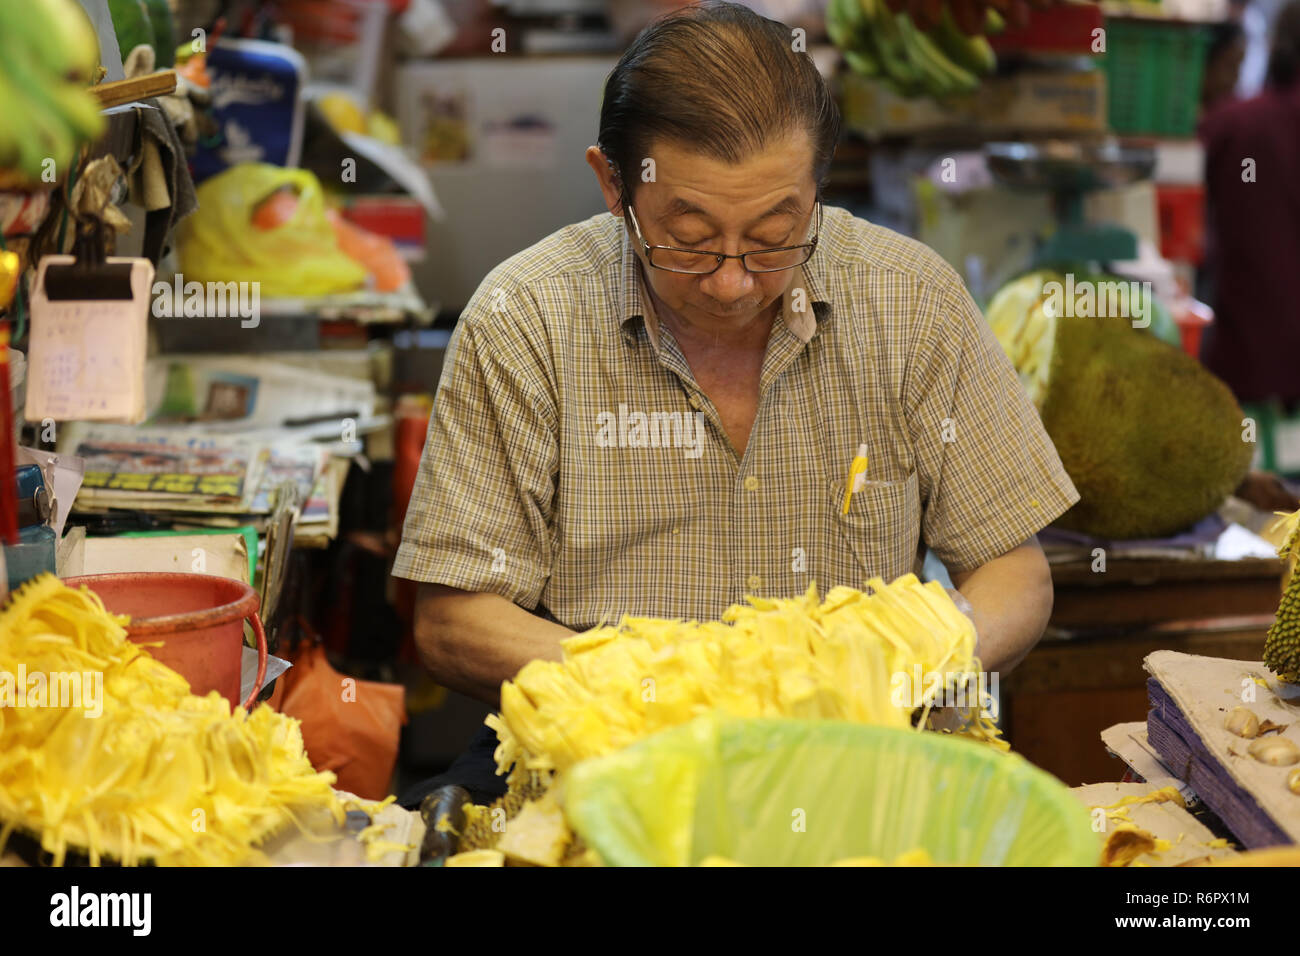 Shopkeeper of the fruit and vegetable market in Little India, Singapore, cleans the inside of the jackfruit, a large tropical fruits, for sale. Stock Photo